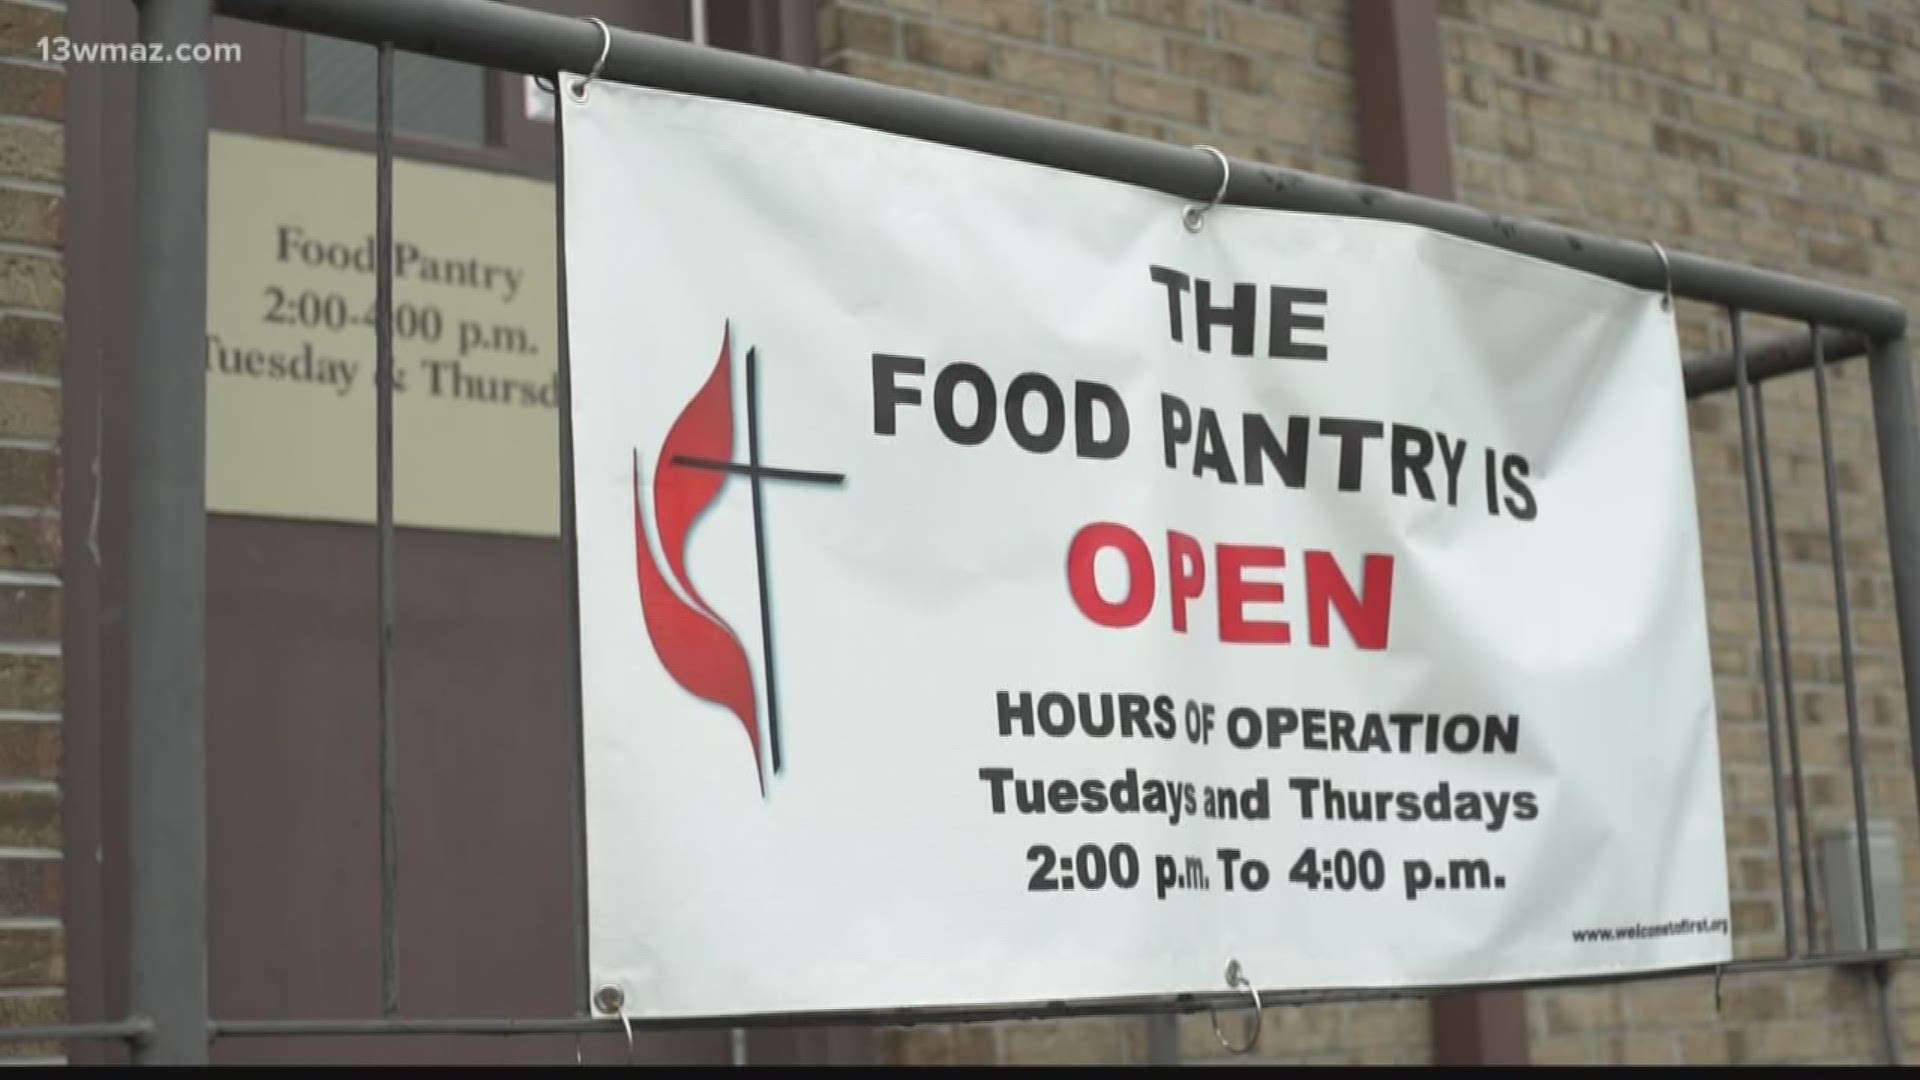 First United Methodist Church works with the Middle Georgia Community Food Bank to help provide food for children and their families in Warner Robins.